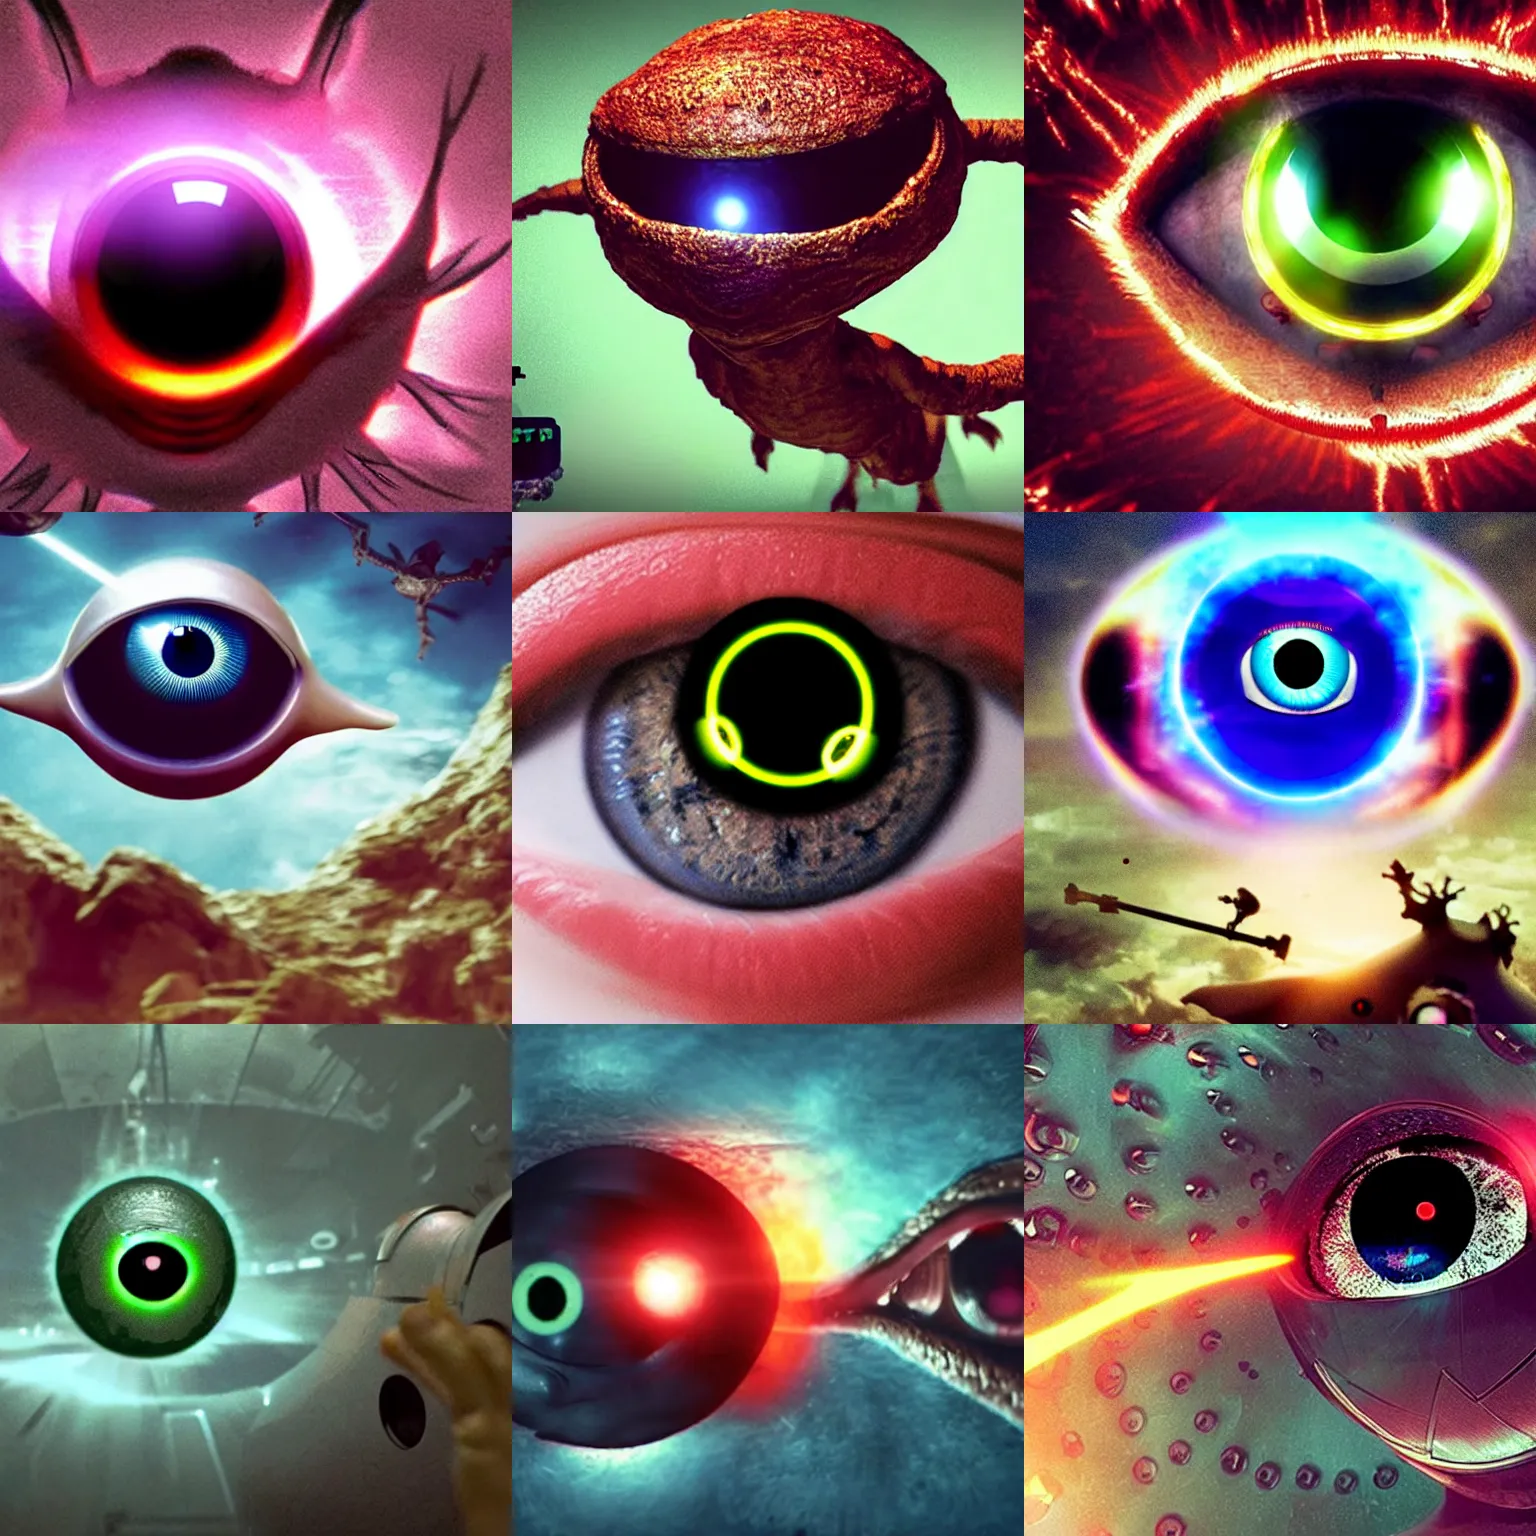 Prompt: <3d-film quality=high mode='attention grabbing'>a huge flying eyeball monster shoots lasers</3d-film>